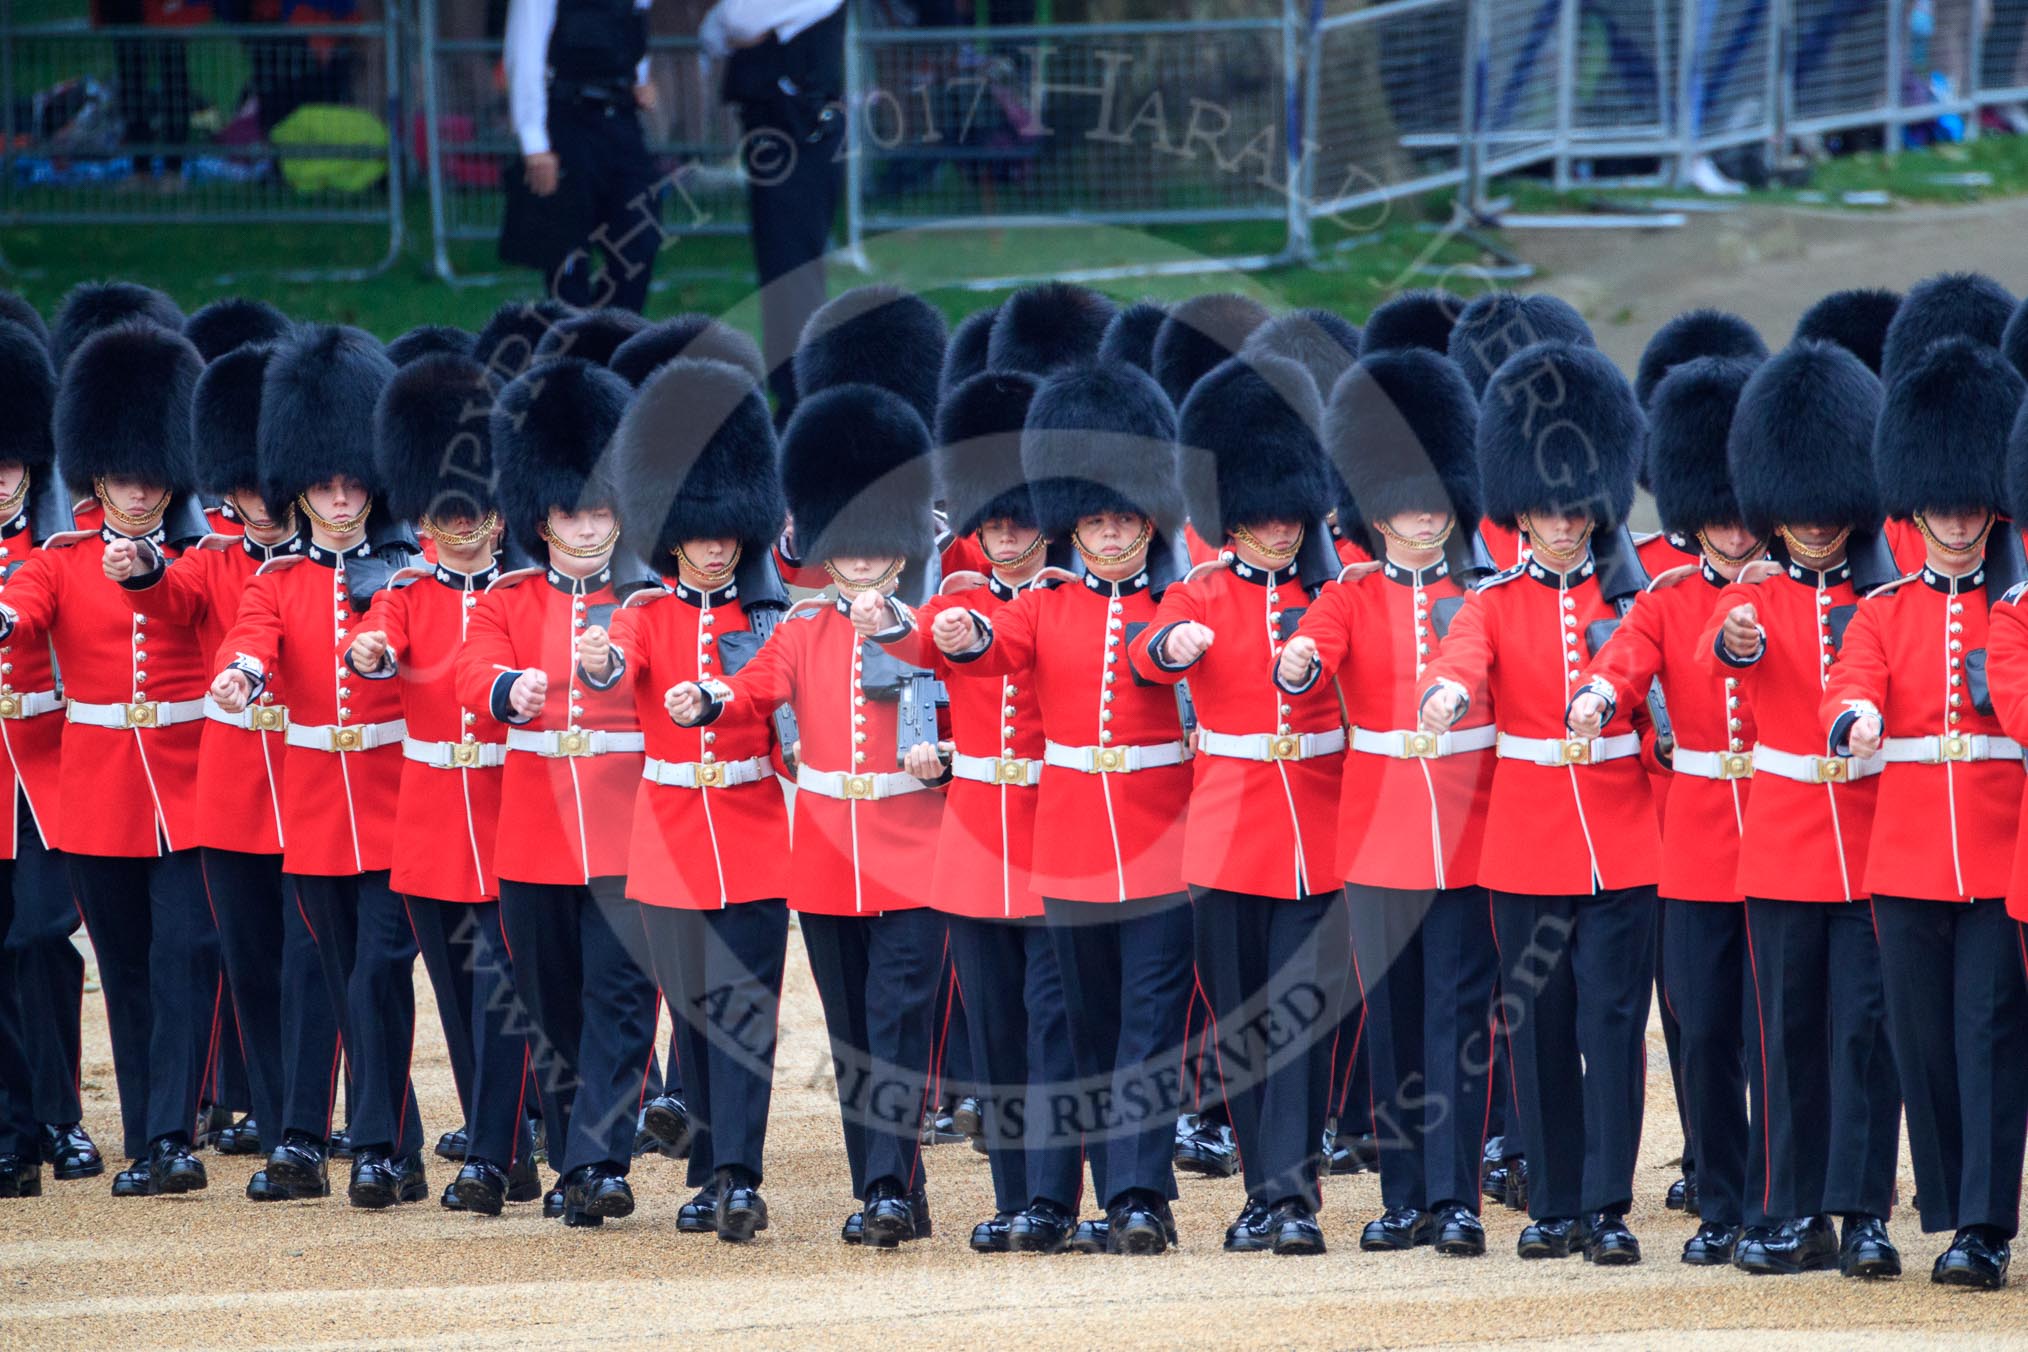 during The Colonel's Review {iptcyear4} (final rehearsal for Trooping the Colour, The Queen's Birthday Parade)  at Horse Guards Parade, Westminster, London, 2 June 2018, 10:37.